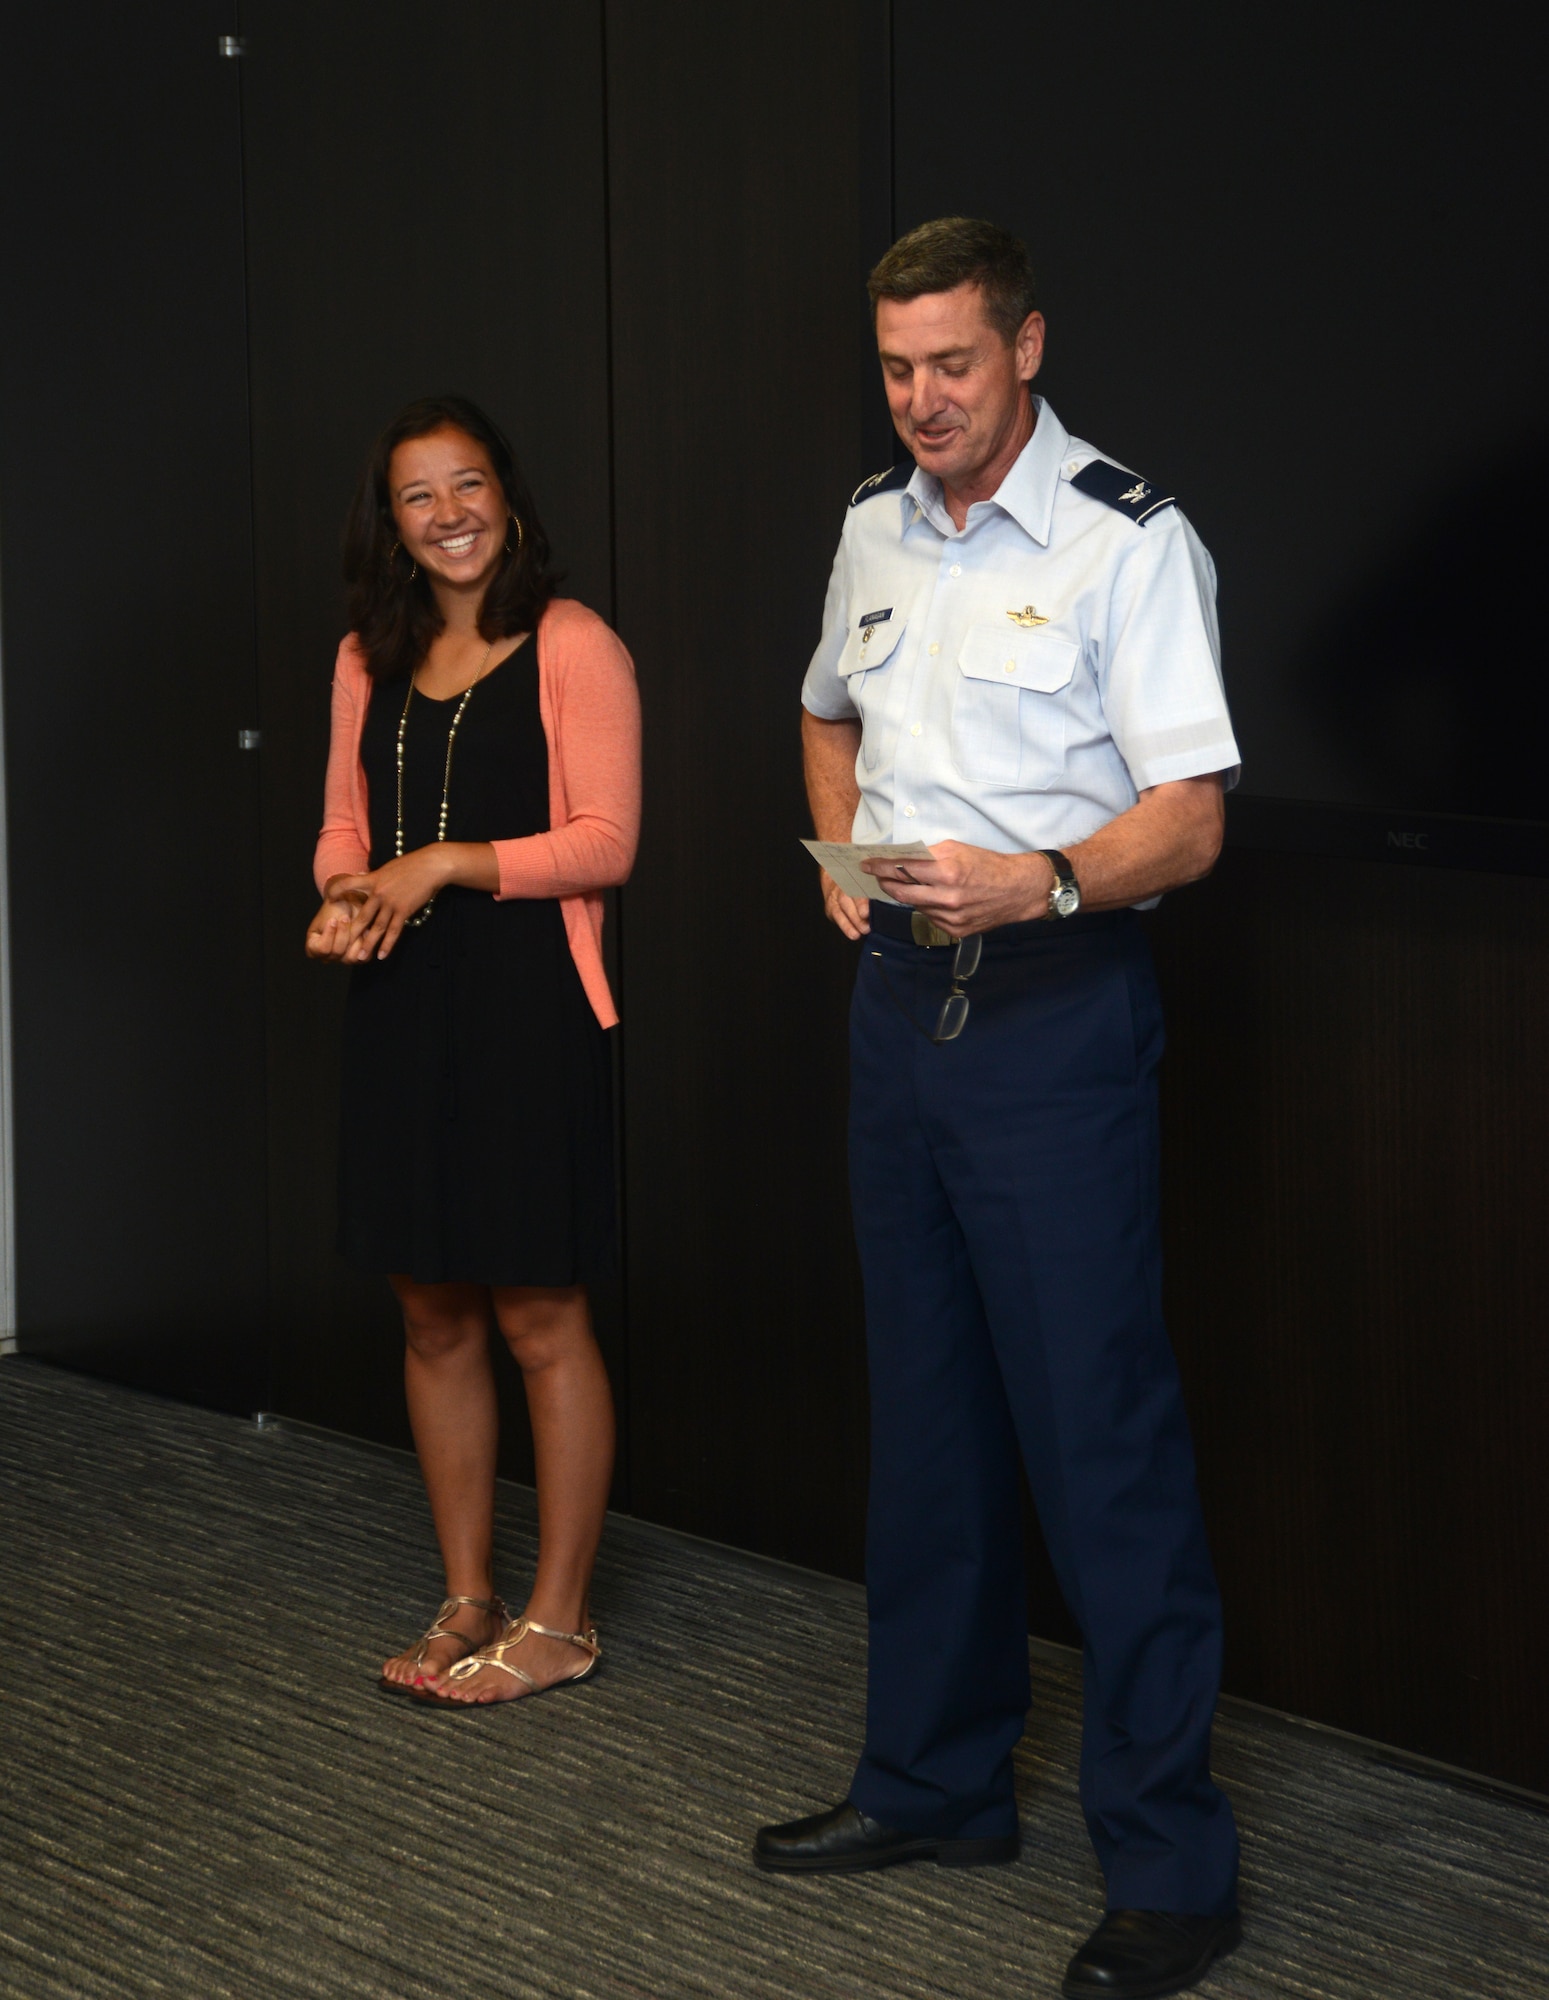 Col. Michael Flanagan, Air National Guard director of manpower, personnel and services, honors the Air National Guard 2014 Youth of the Year, Miss Caroline Ascherl during a ceremony at the Air National Guard Readiness Center on Joint Base Andrews, Md., July 9, 2014. (U.S. Air National Guard photo by Senior Airman John E. Hillier/Released)